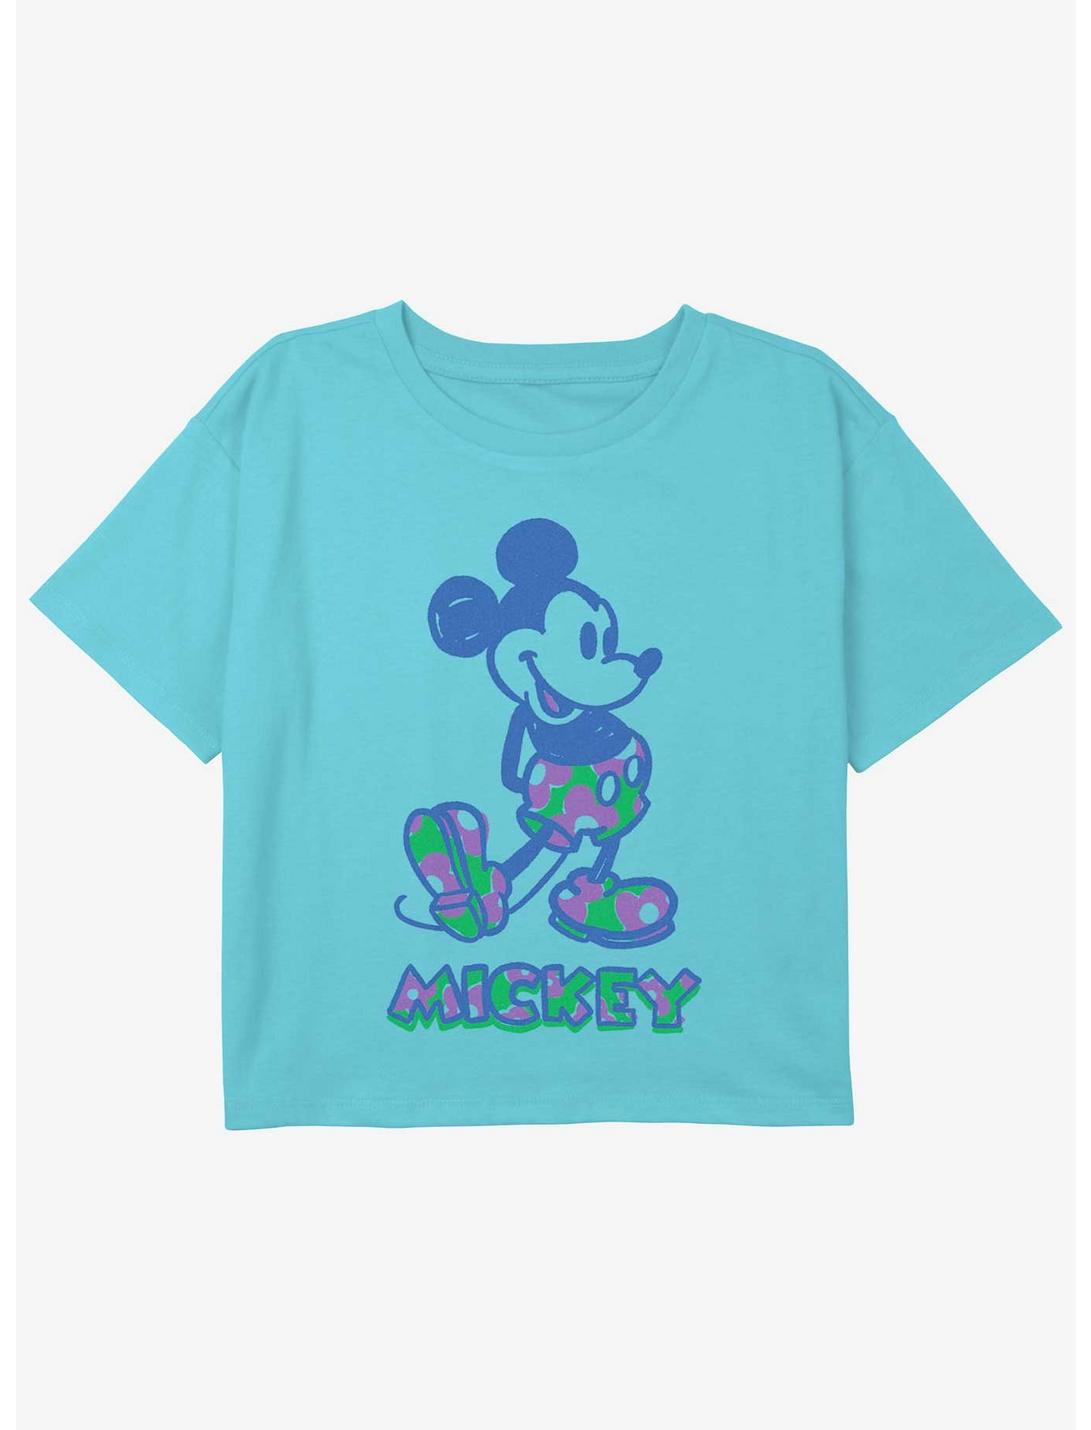 Disney Mickey Mouse Floral Pants Girls Youth Crop T-Shirt, BLUE, hi-res